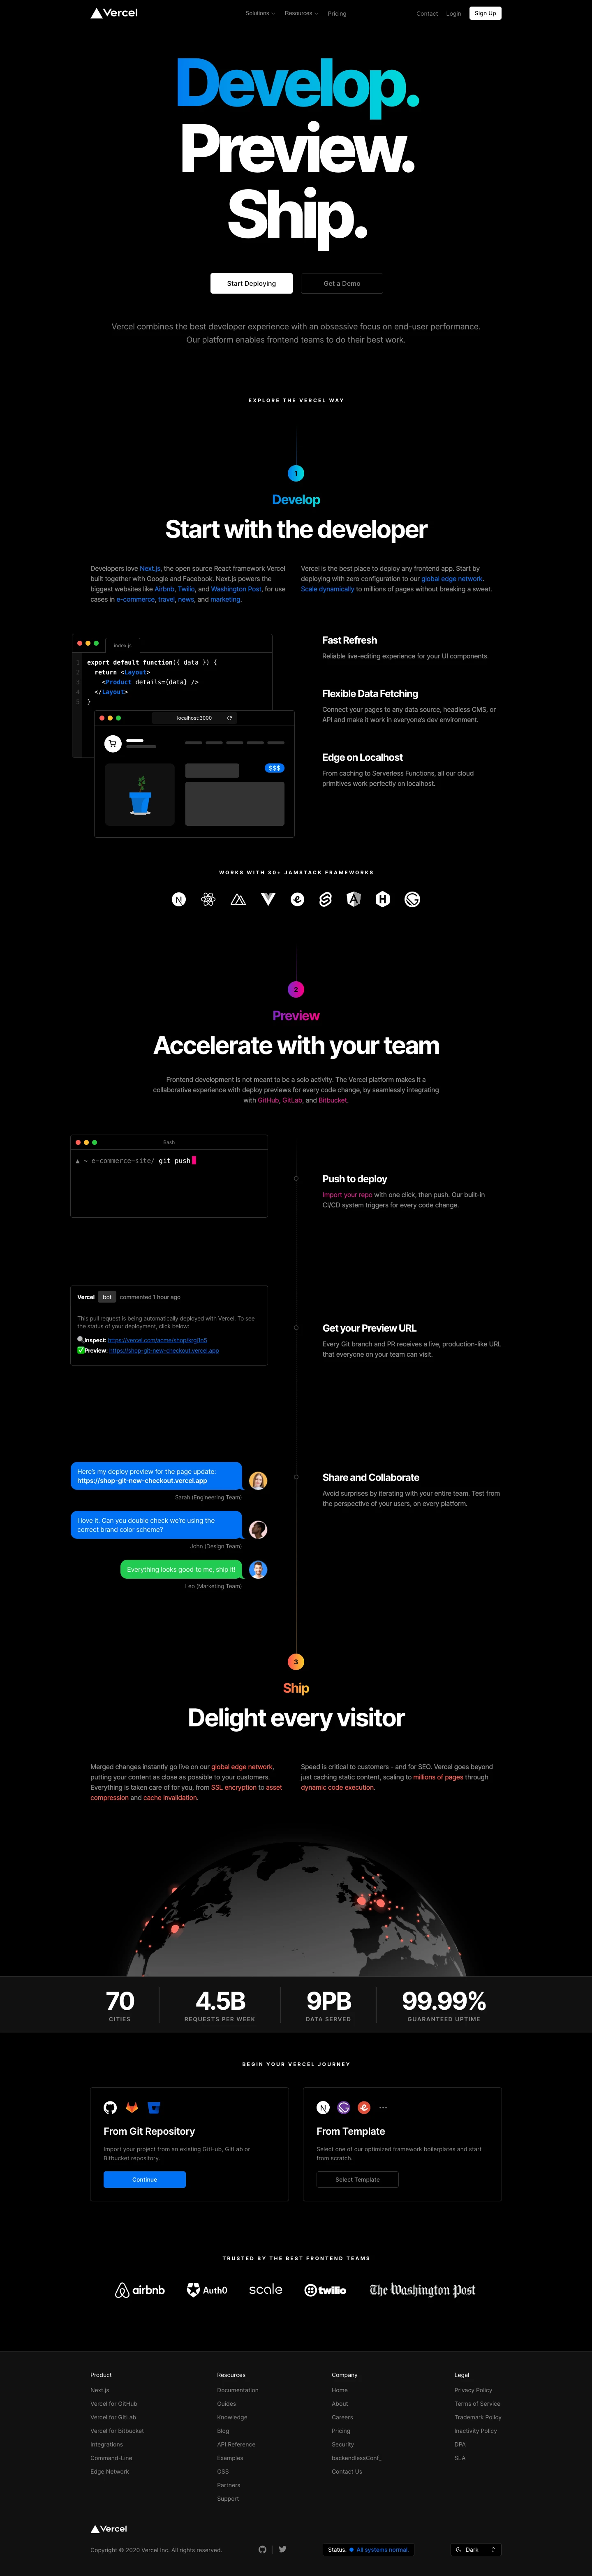 Vercel Landing Page Example: Deploy web projects with the best frontend developer experience and highest end-user performance.